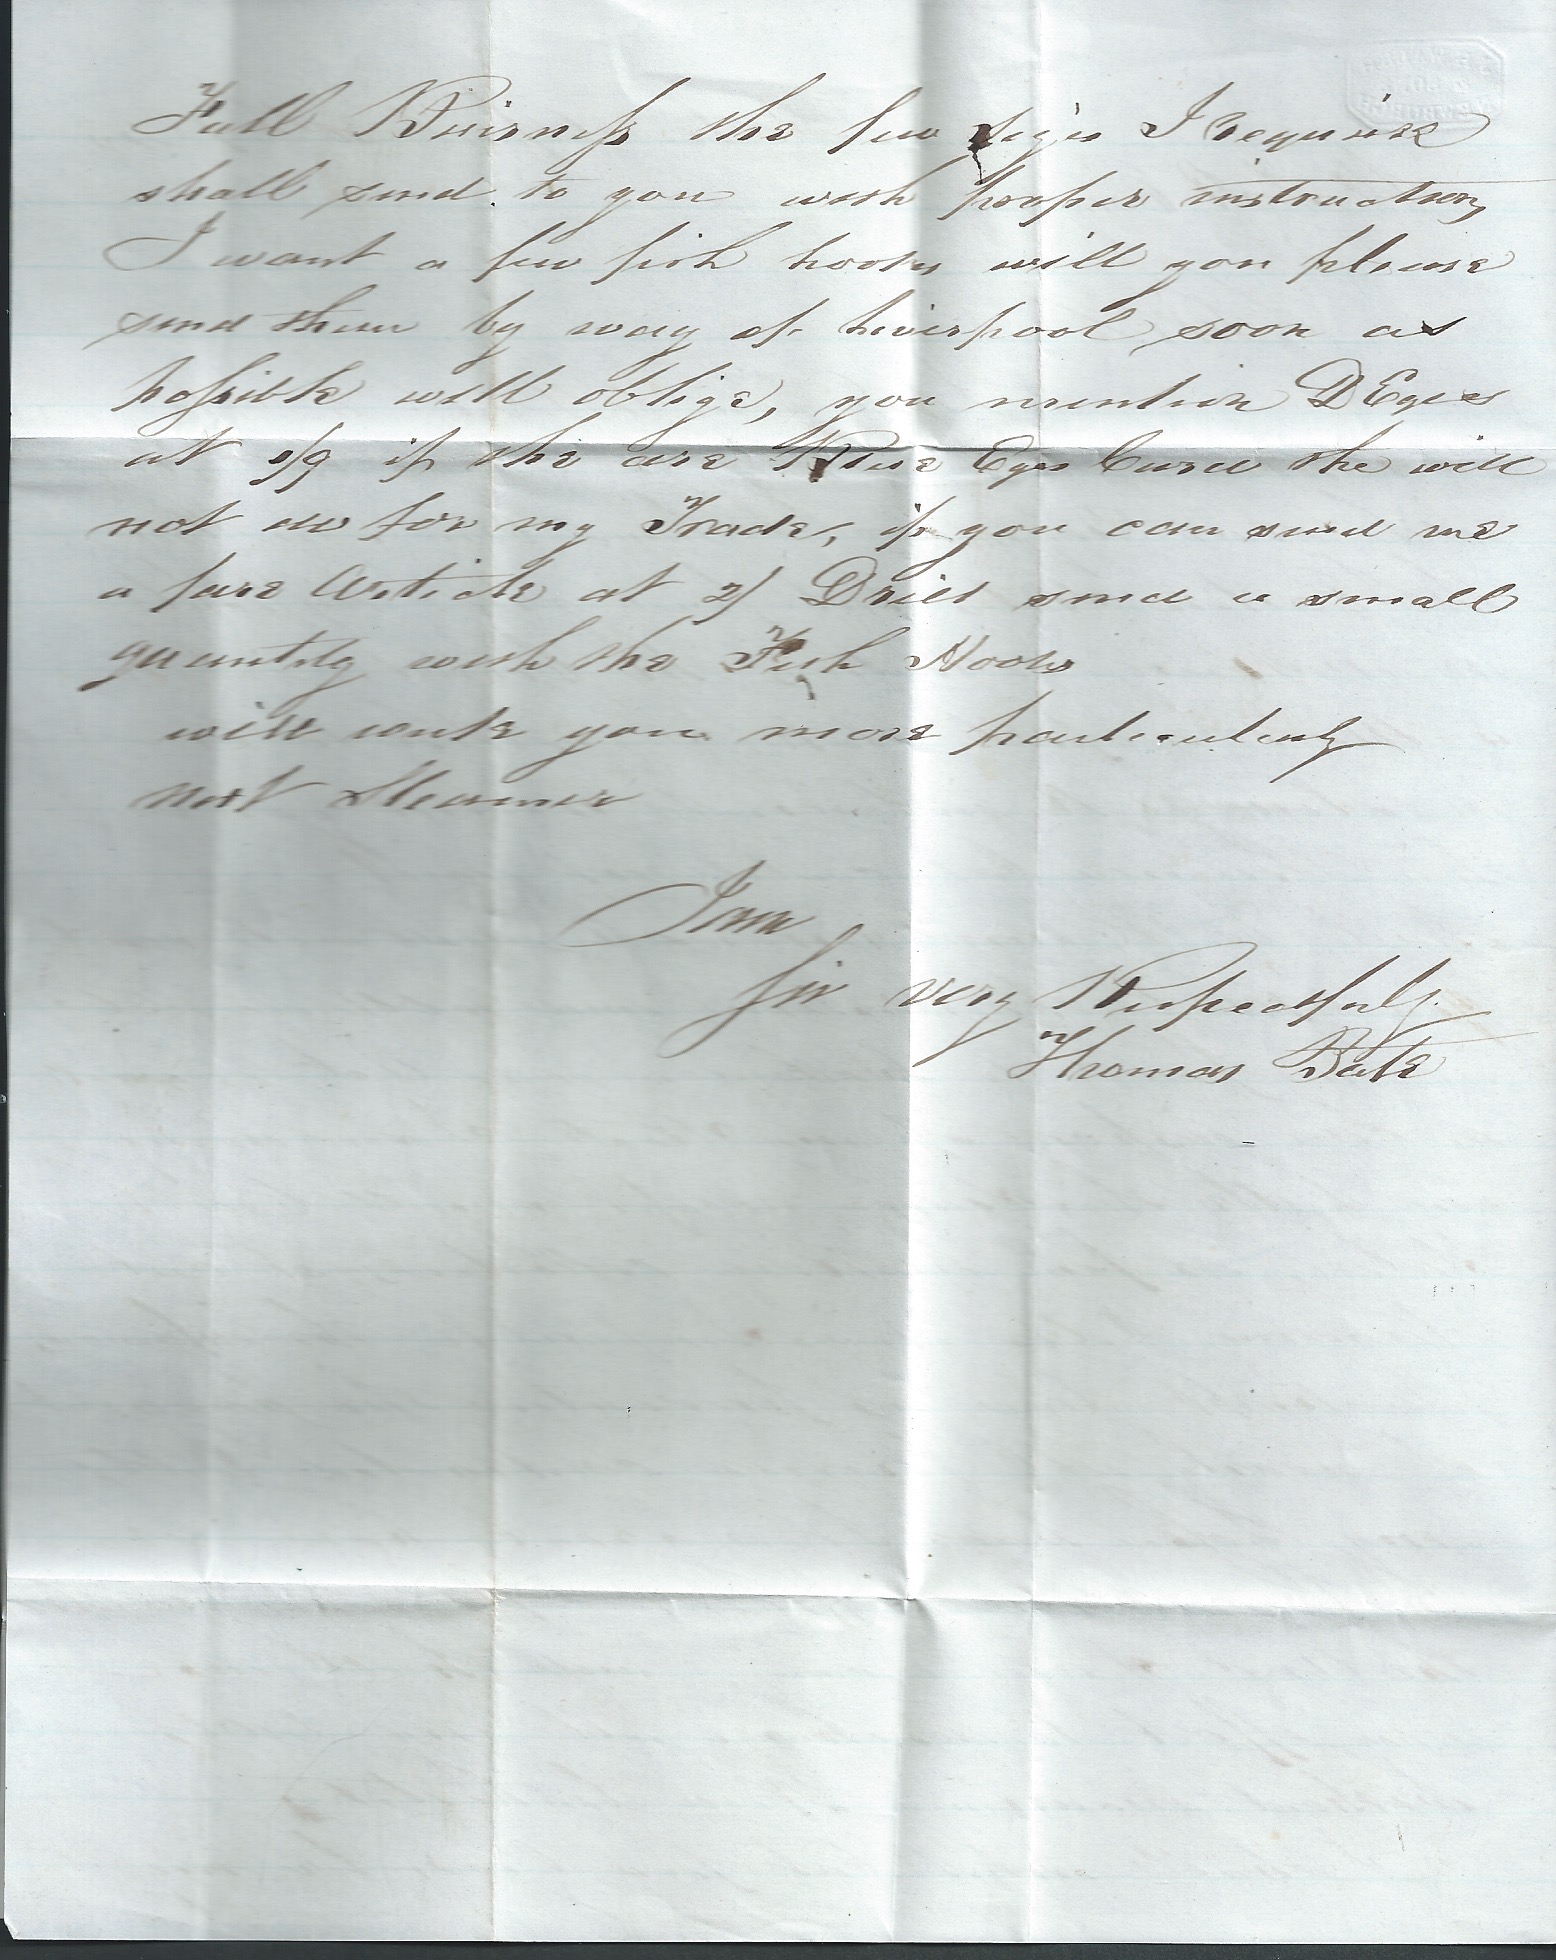 United States - Boston - British 1843 (Apr 30) Entire Letter from Boston to Worcestershire, charged - Image 3 of 6